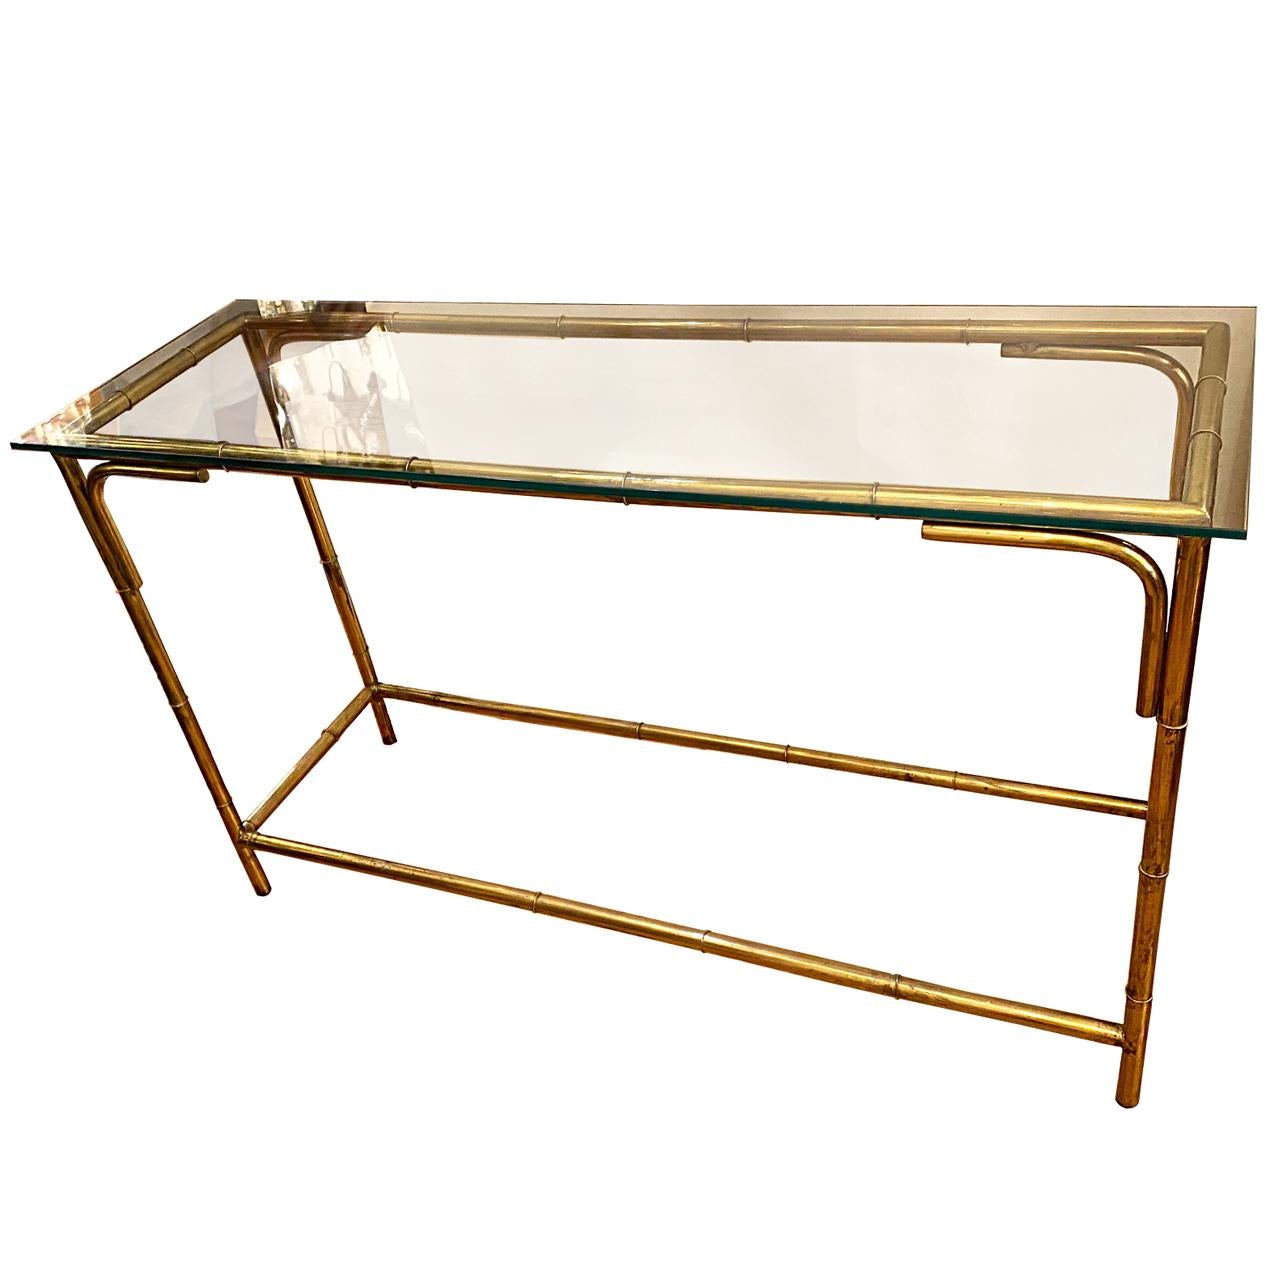 A circa 1960s Italian brass console table with glass top.

Measurements:
Height 32